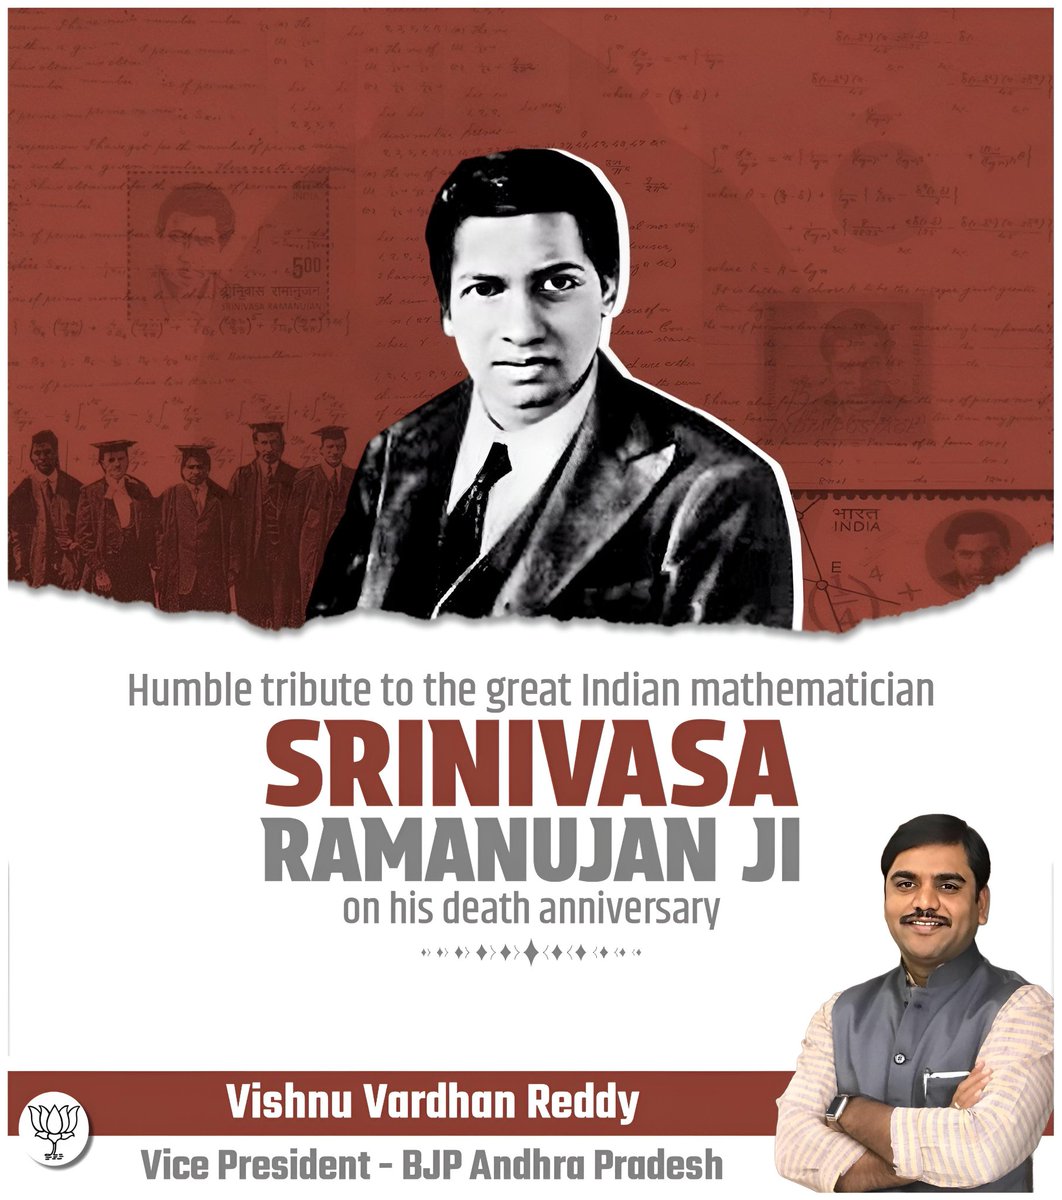 Remembering great mathematician Srinivasa Ramanujan ji on his death anniversary. His remarkable mathematical insights continue to inspire awe and admiration. His legacy reminds us of the boundless power of human intellect and determination.